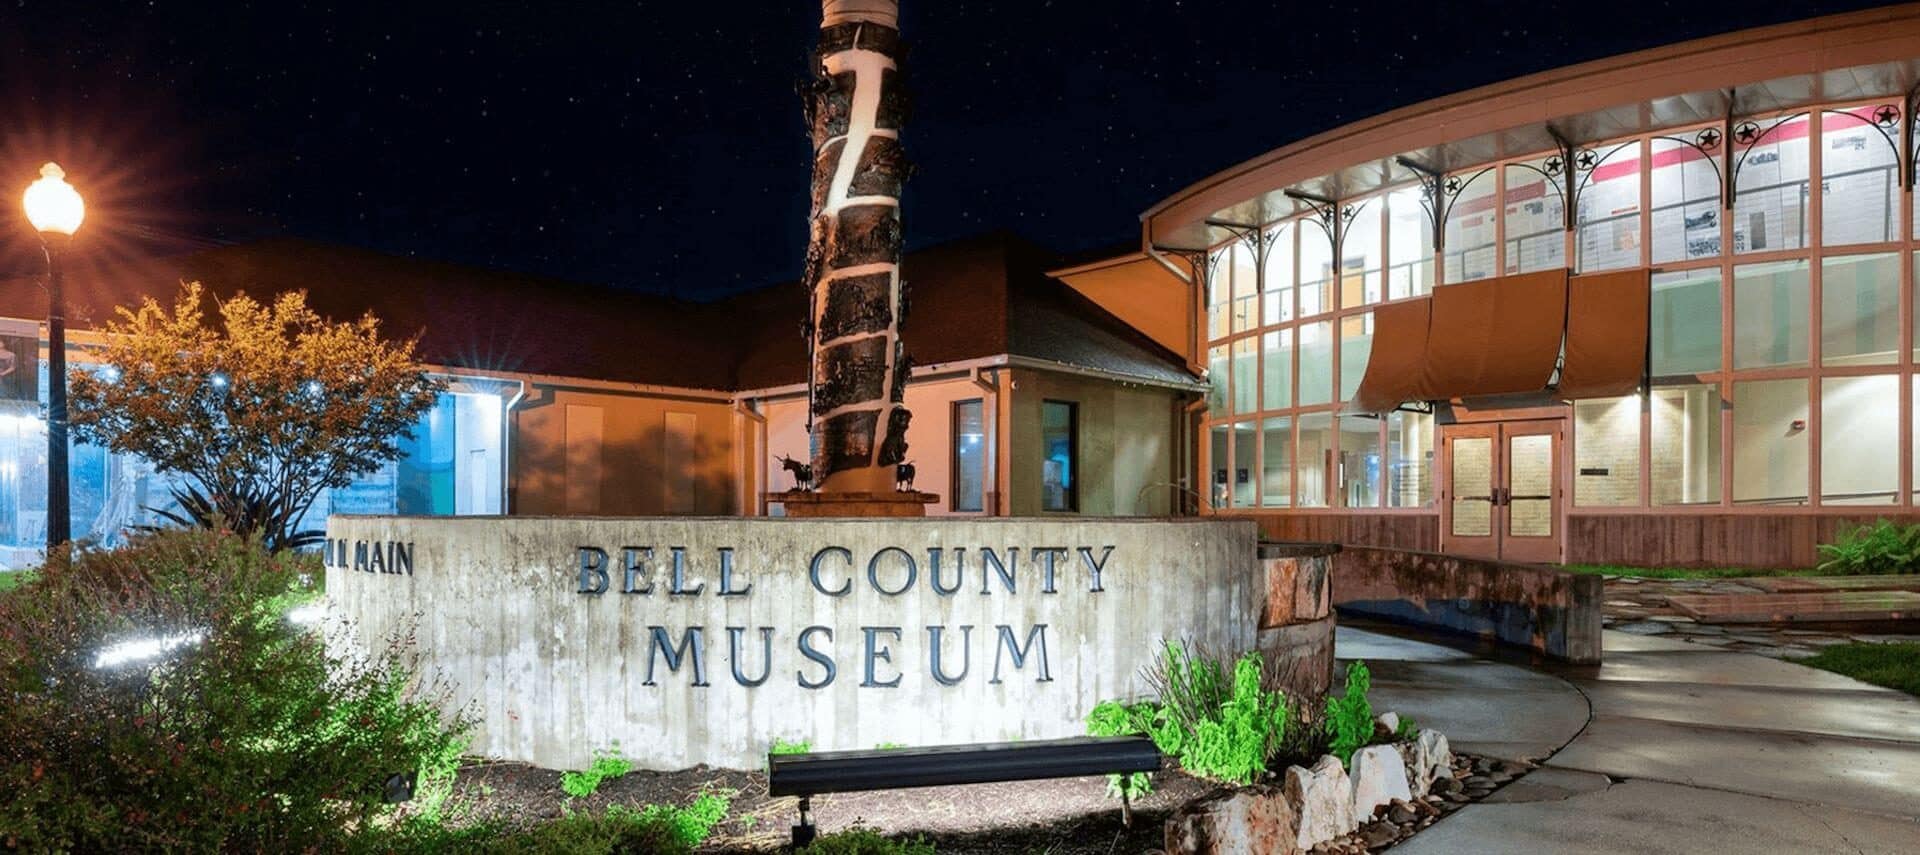 a night time photo of the Bell County Museum with multiple story glass windowed circular building and green bushes and srubs, along with a concrete walkway